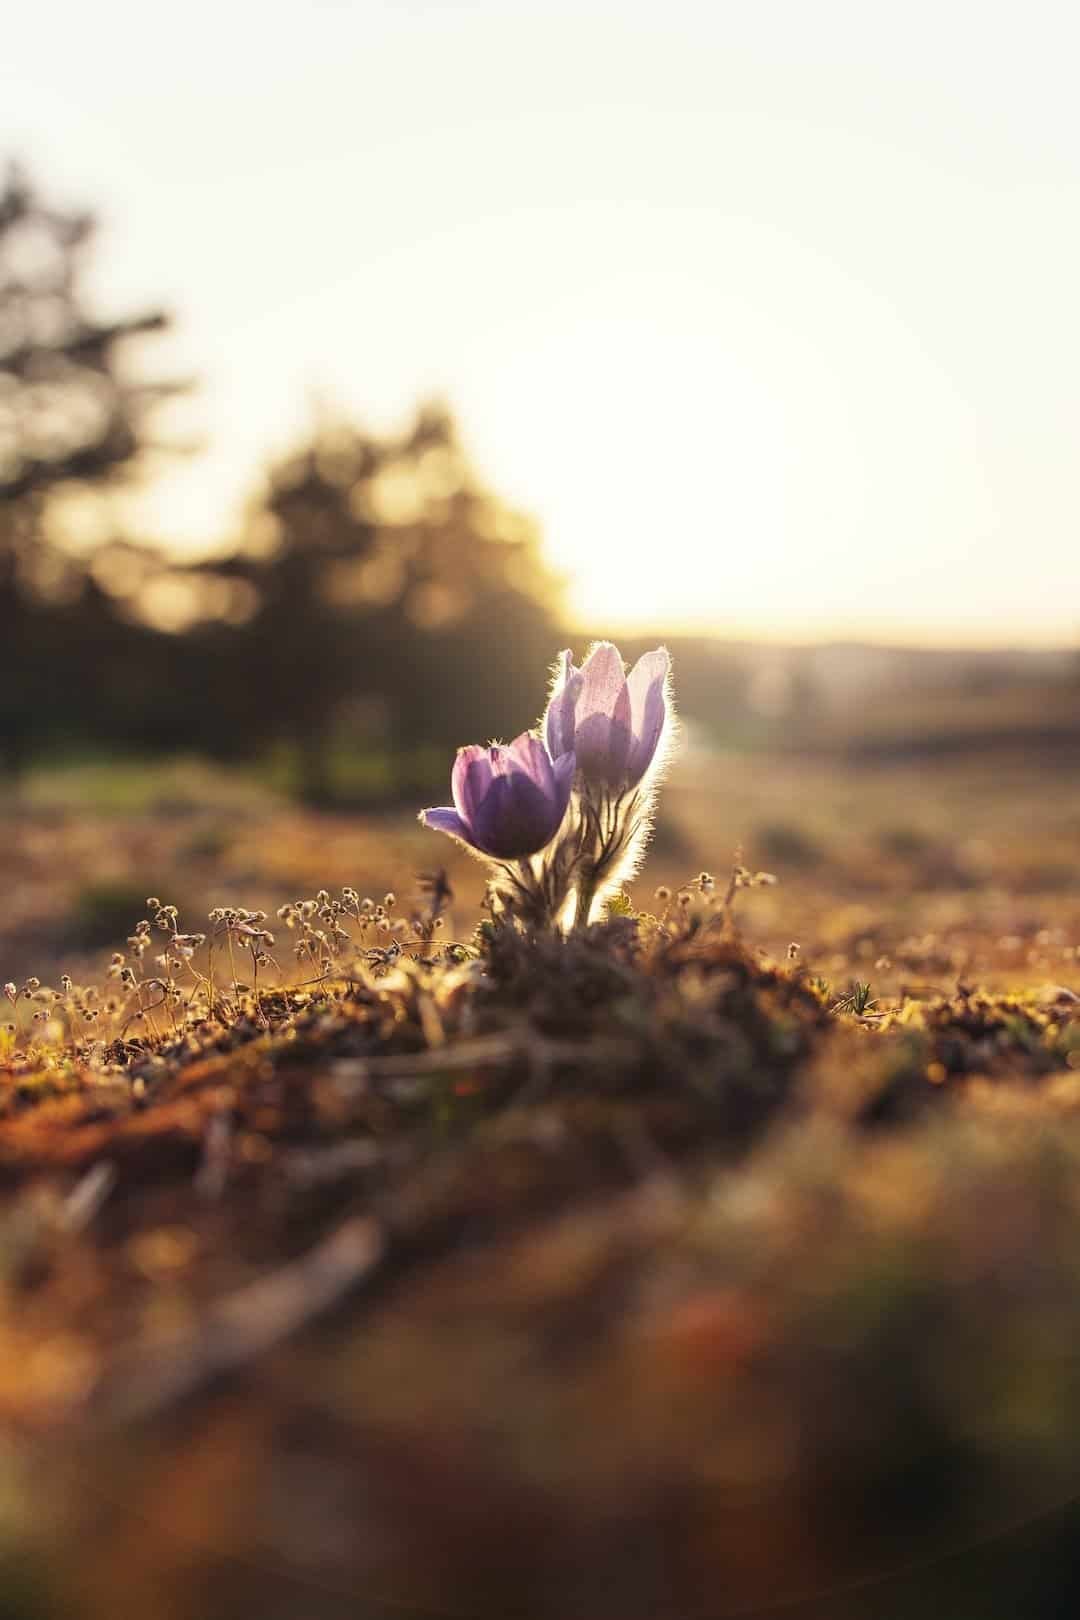 An image featuring a serene garden scene, where a small seedling emerges from the ground, bathed in soft golden sunlight